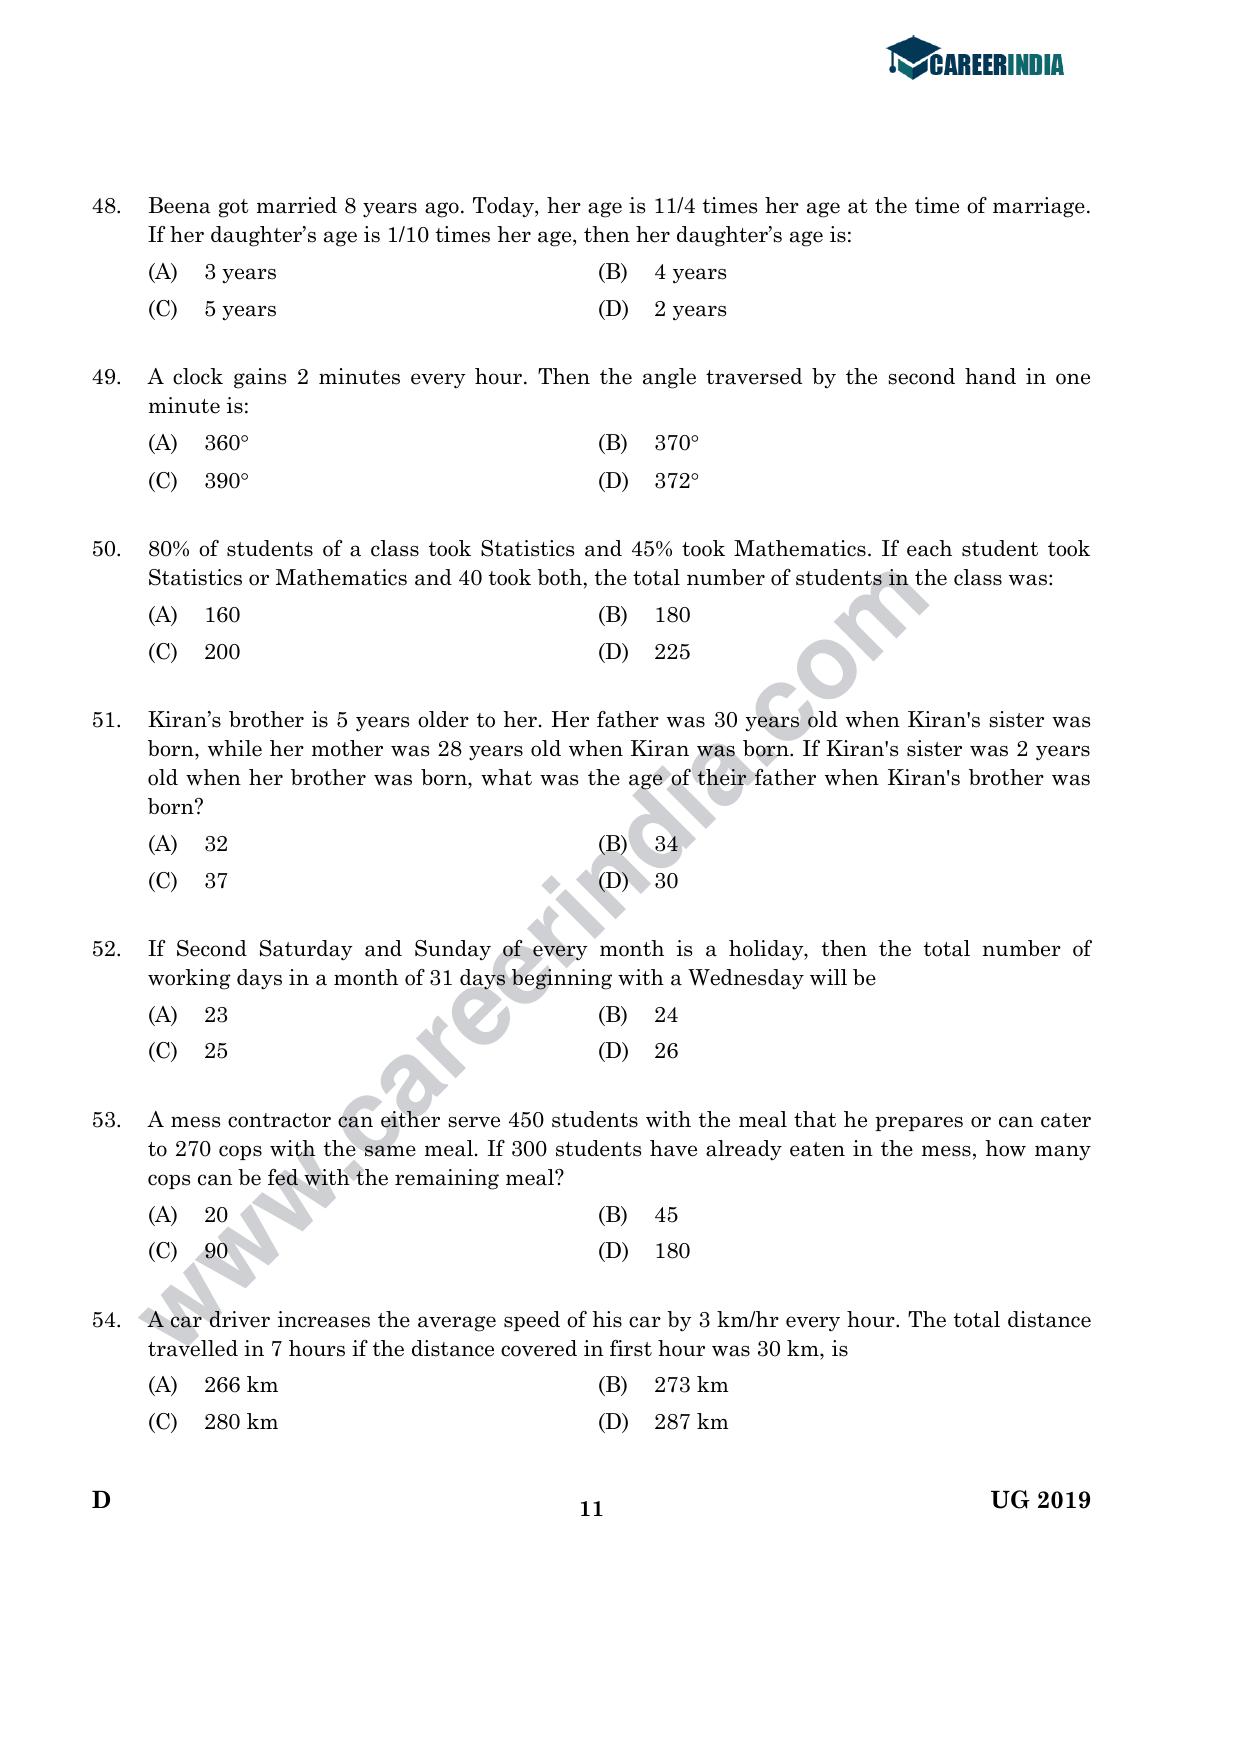 CLAT 2019 UG Logical-Reasoning Question Paper - Page 10